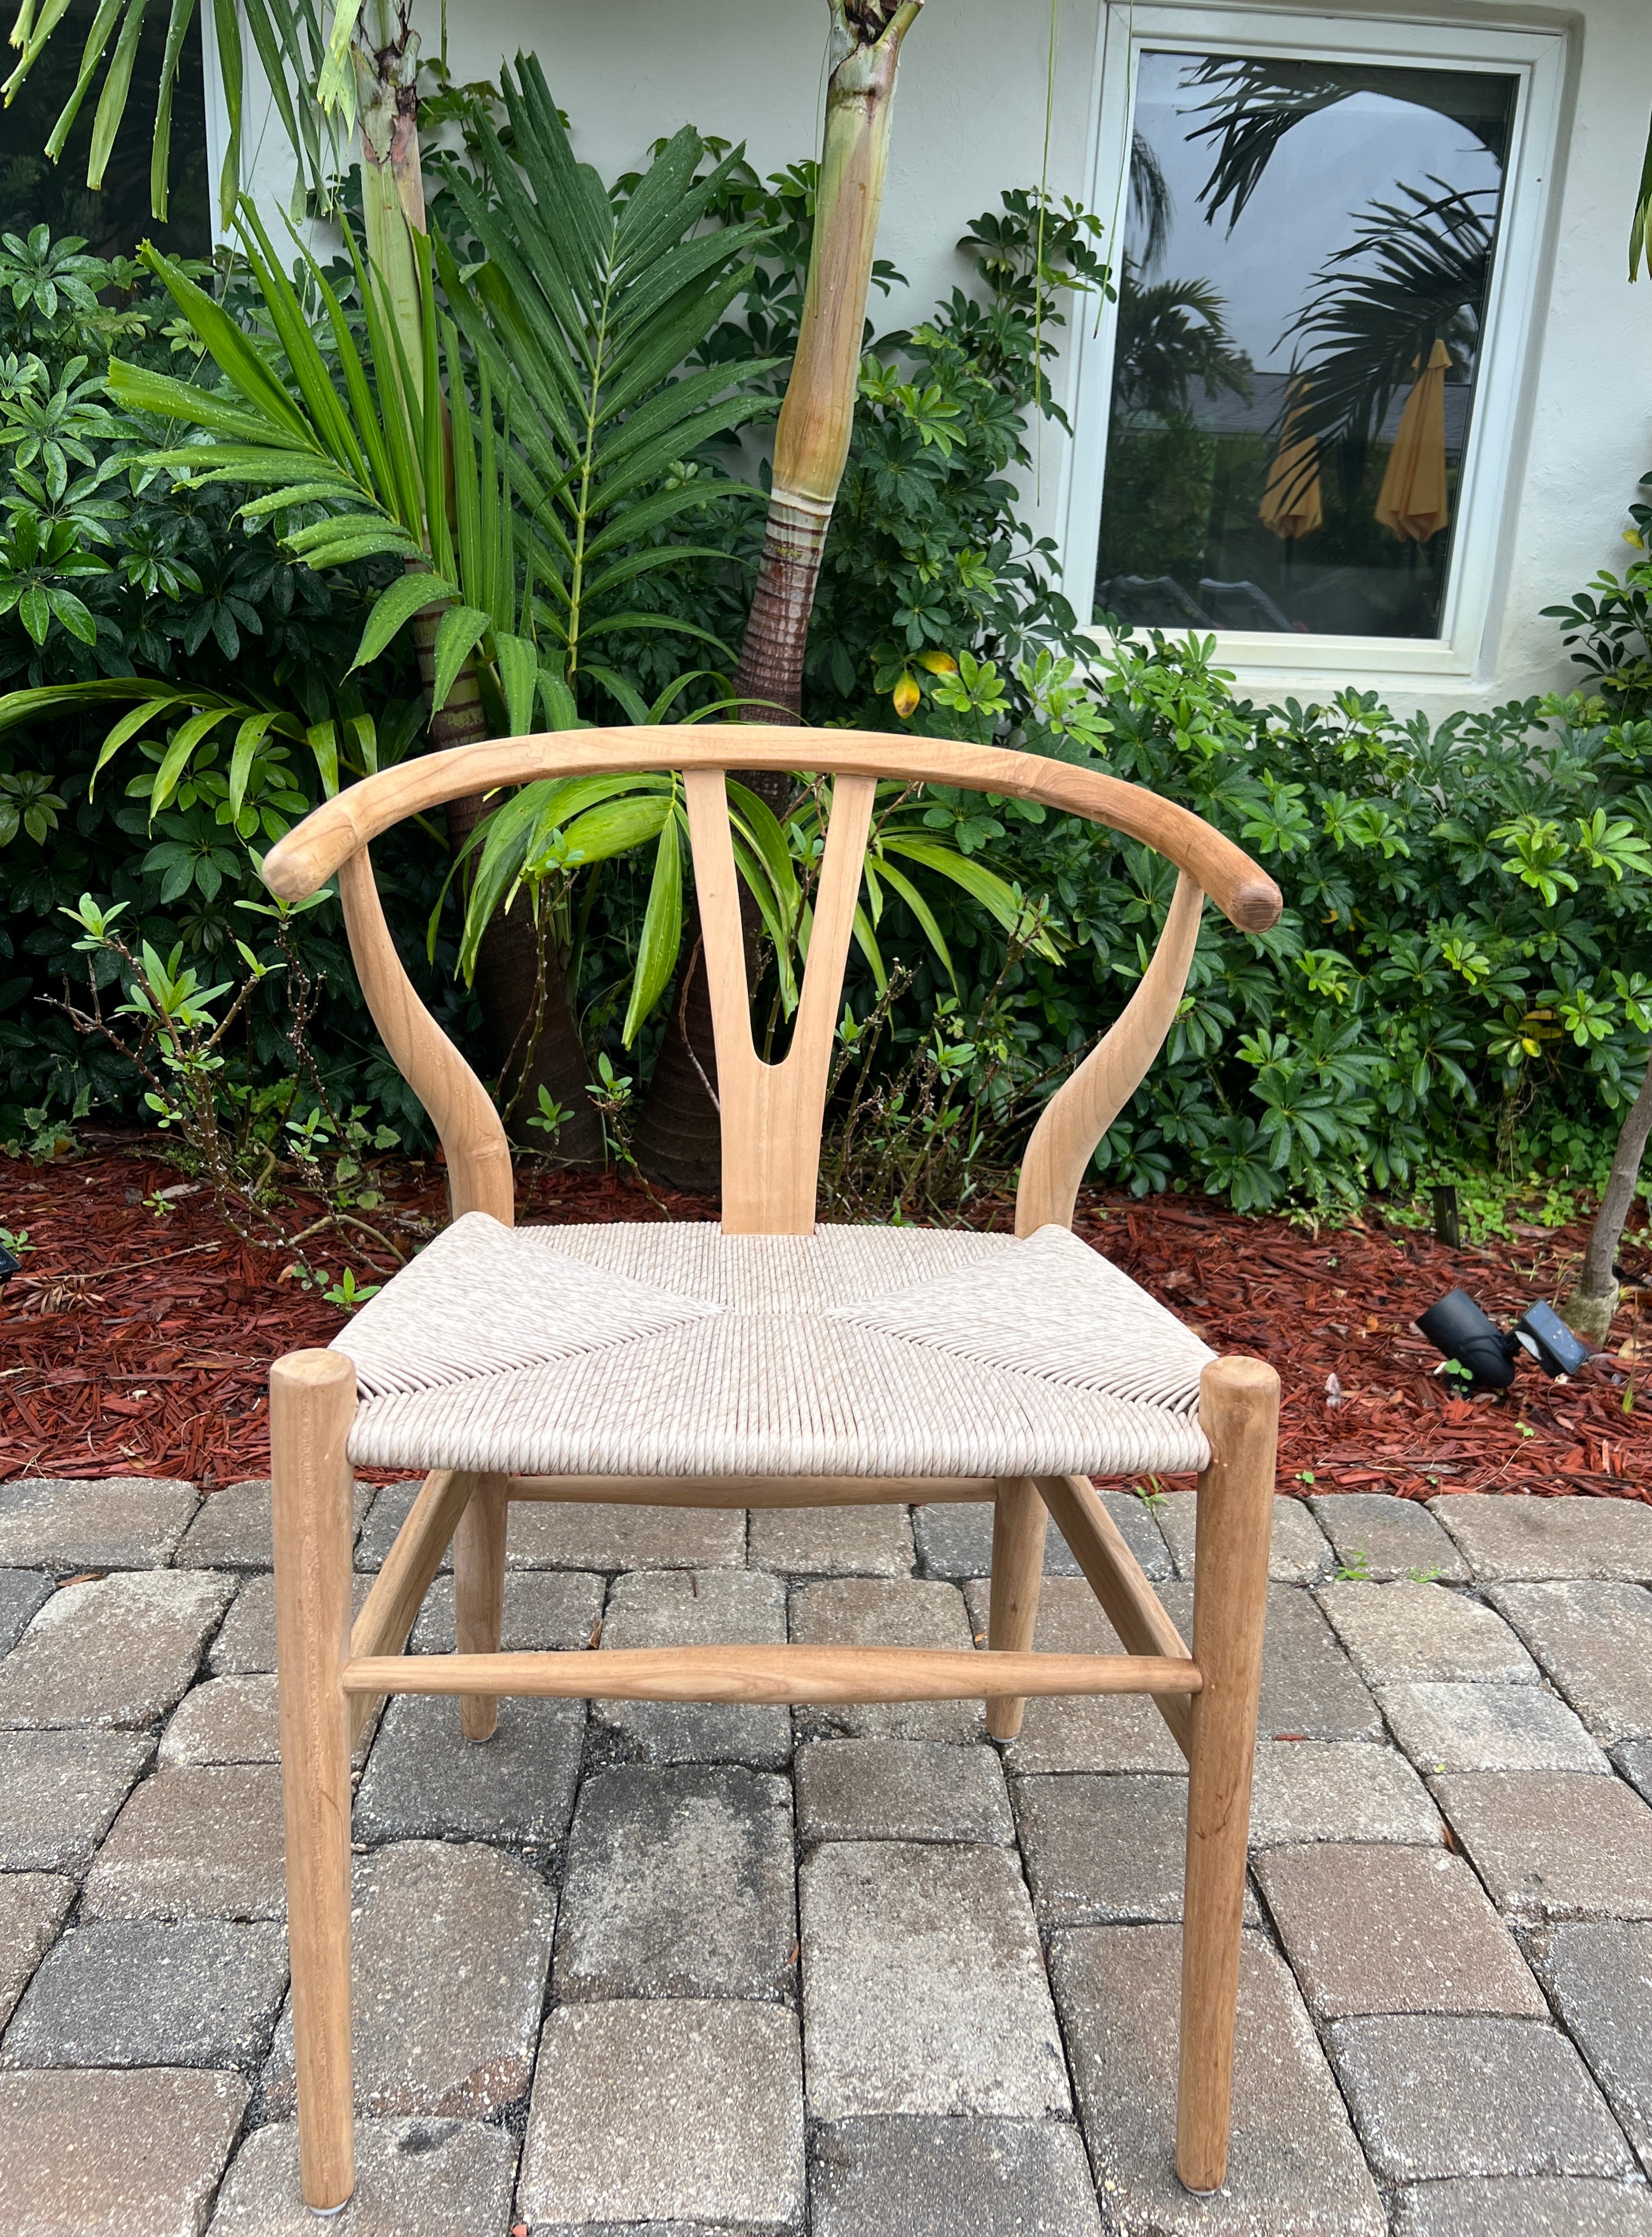 Mid-Century Modern chair in solid teak wood with a natural finish. Handcrafted curved frame features a rounded top with Y-back design. The handwoven cord seat adds to its organic beauty. Classic and timeless design makes this a great accent chair or